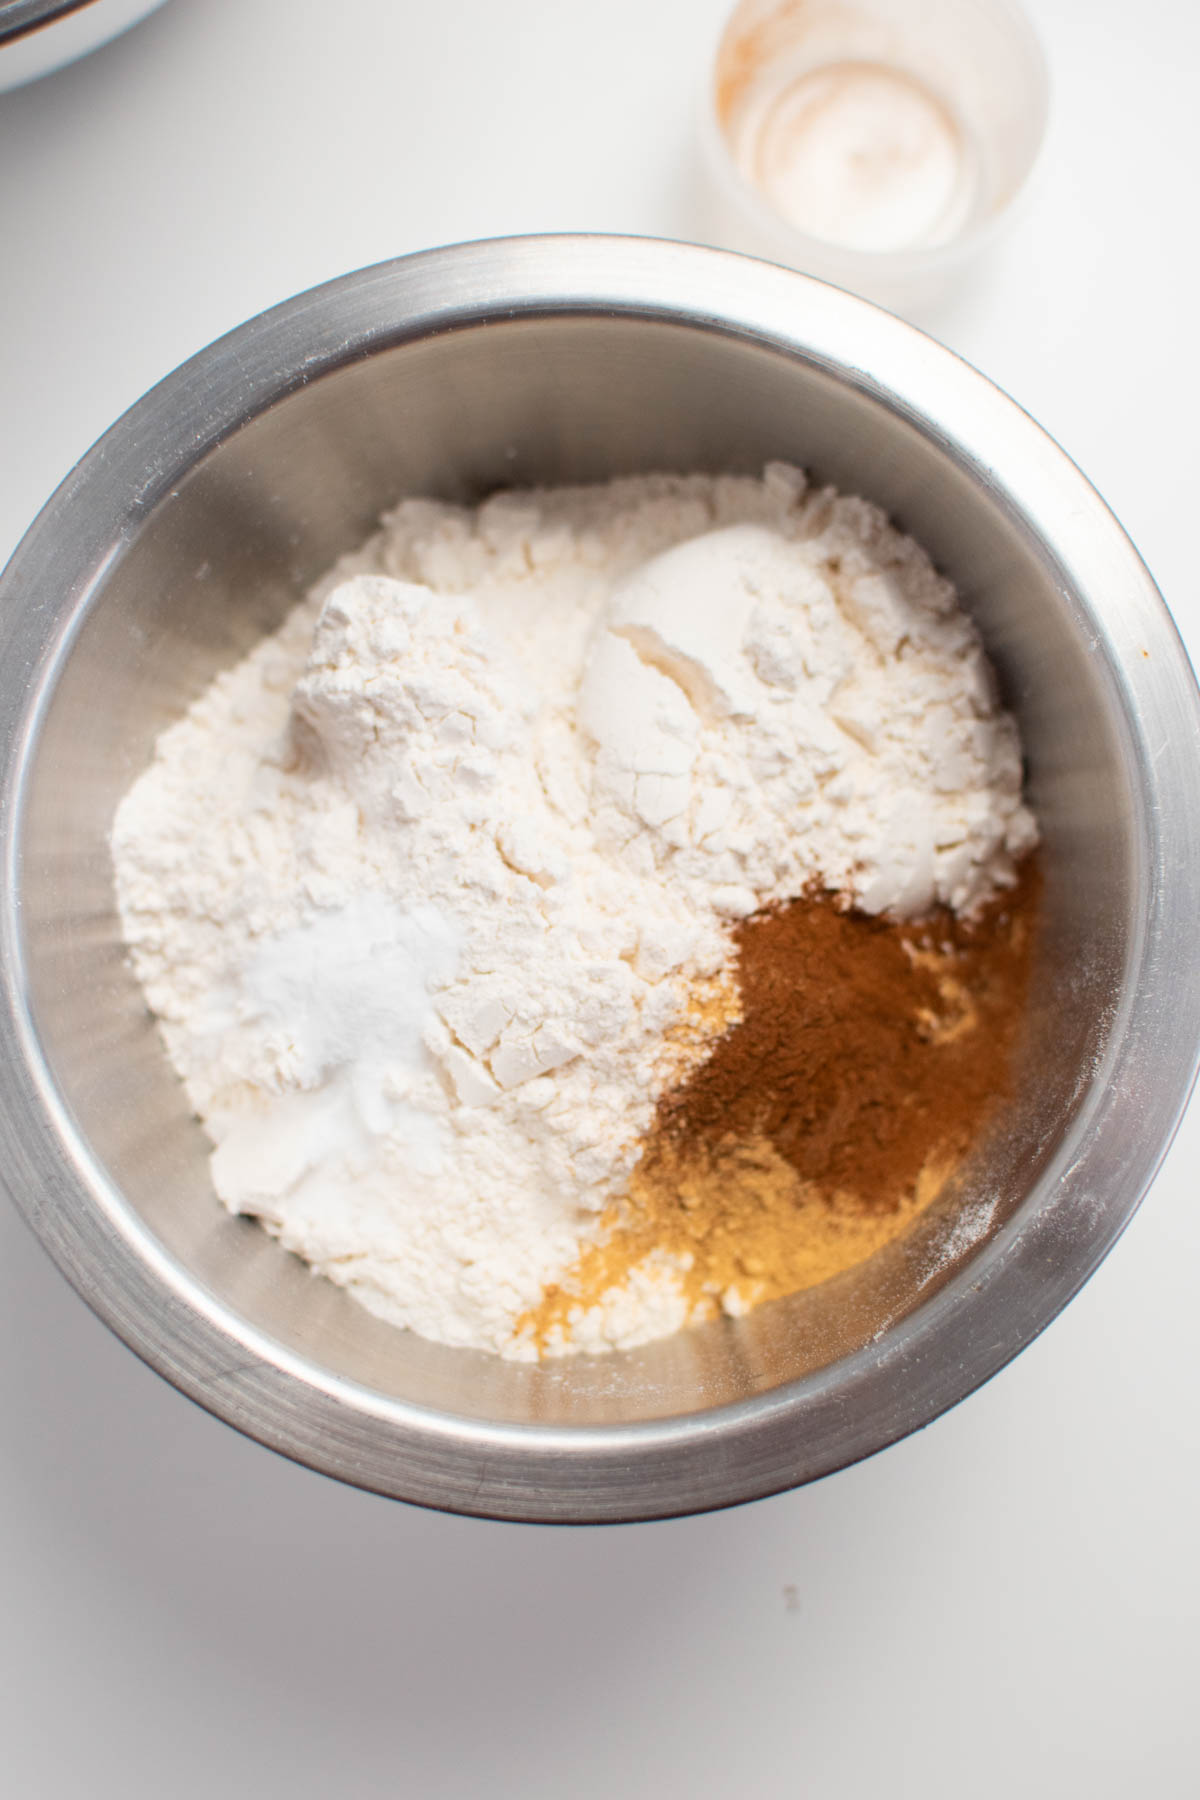 Piles of flour, cinnamon, and ginger in metal mixing bowl.